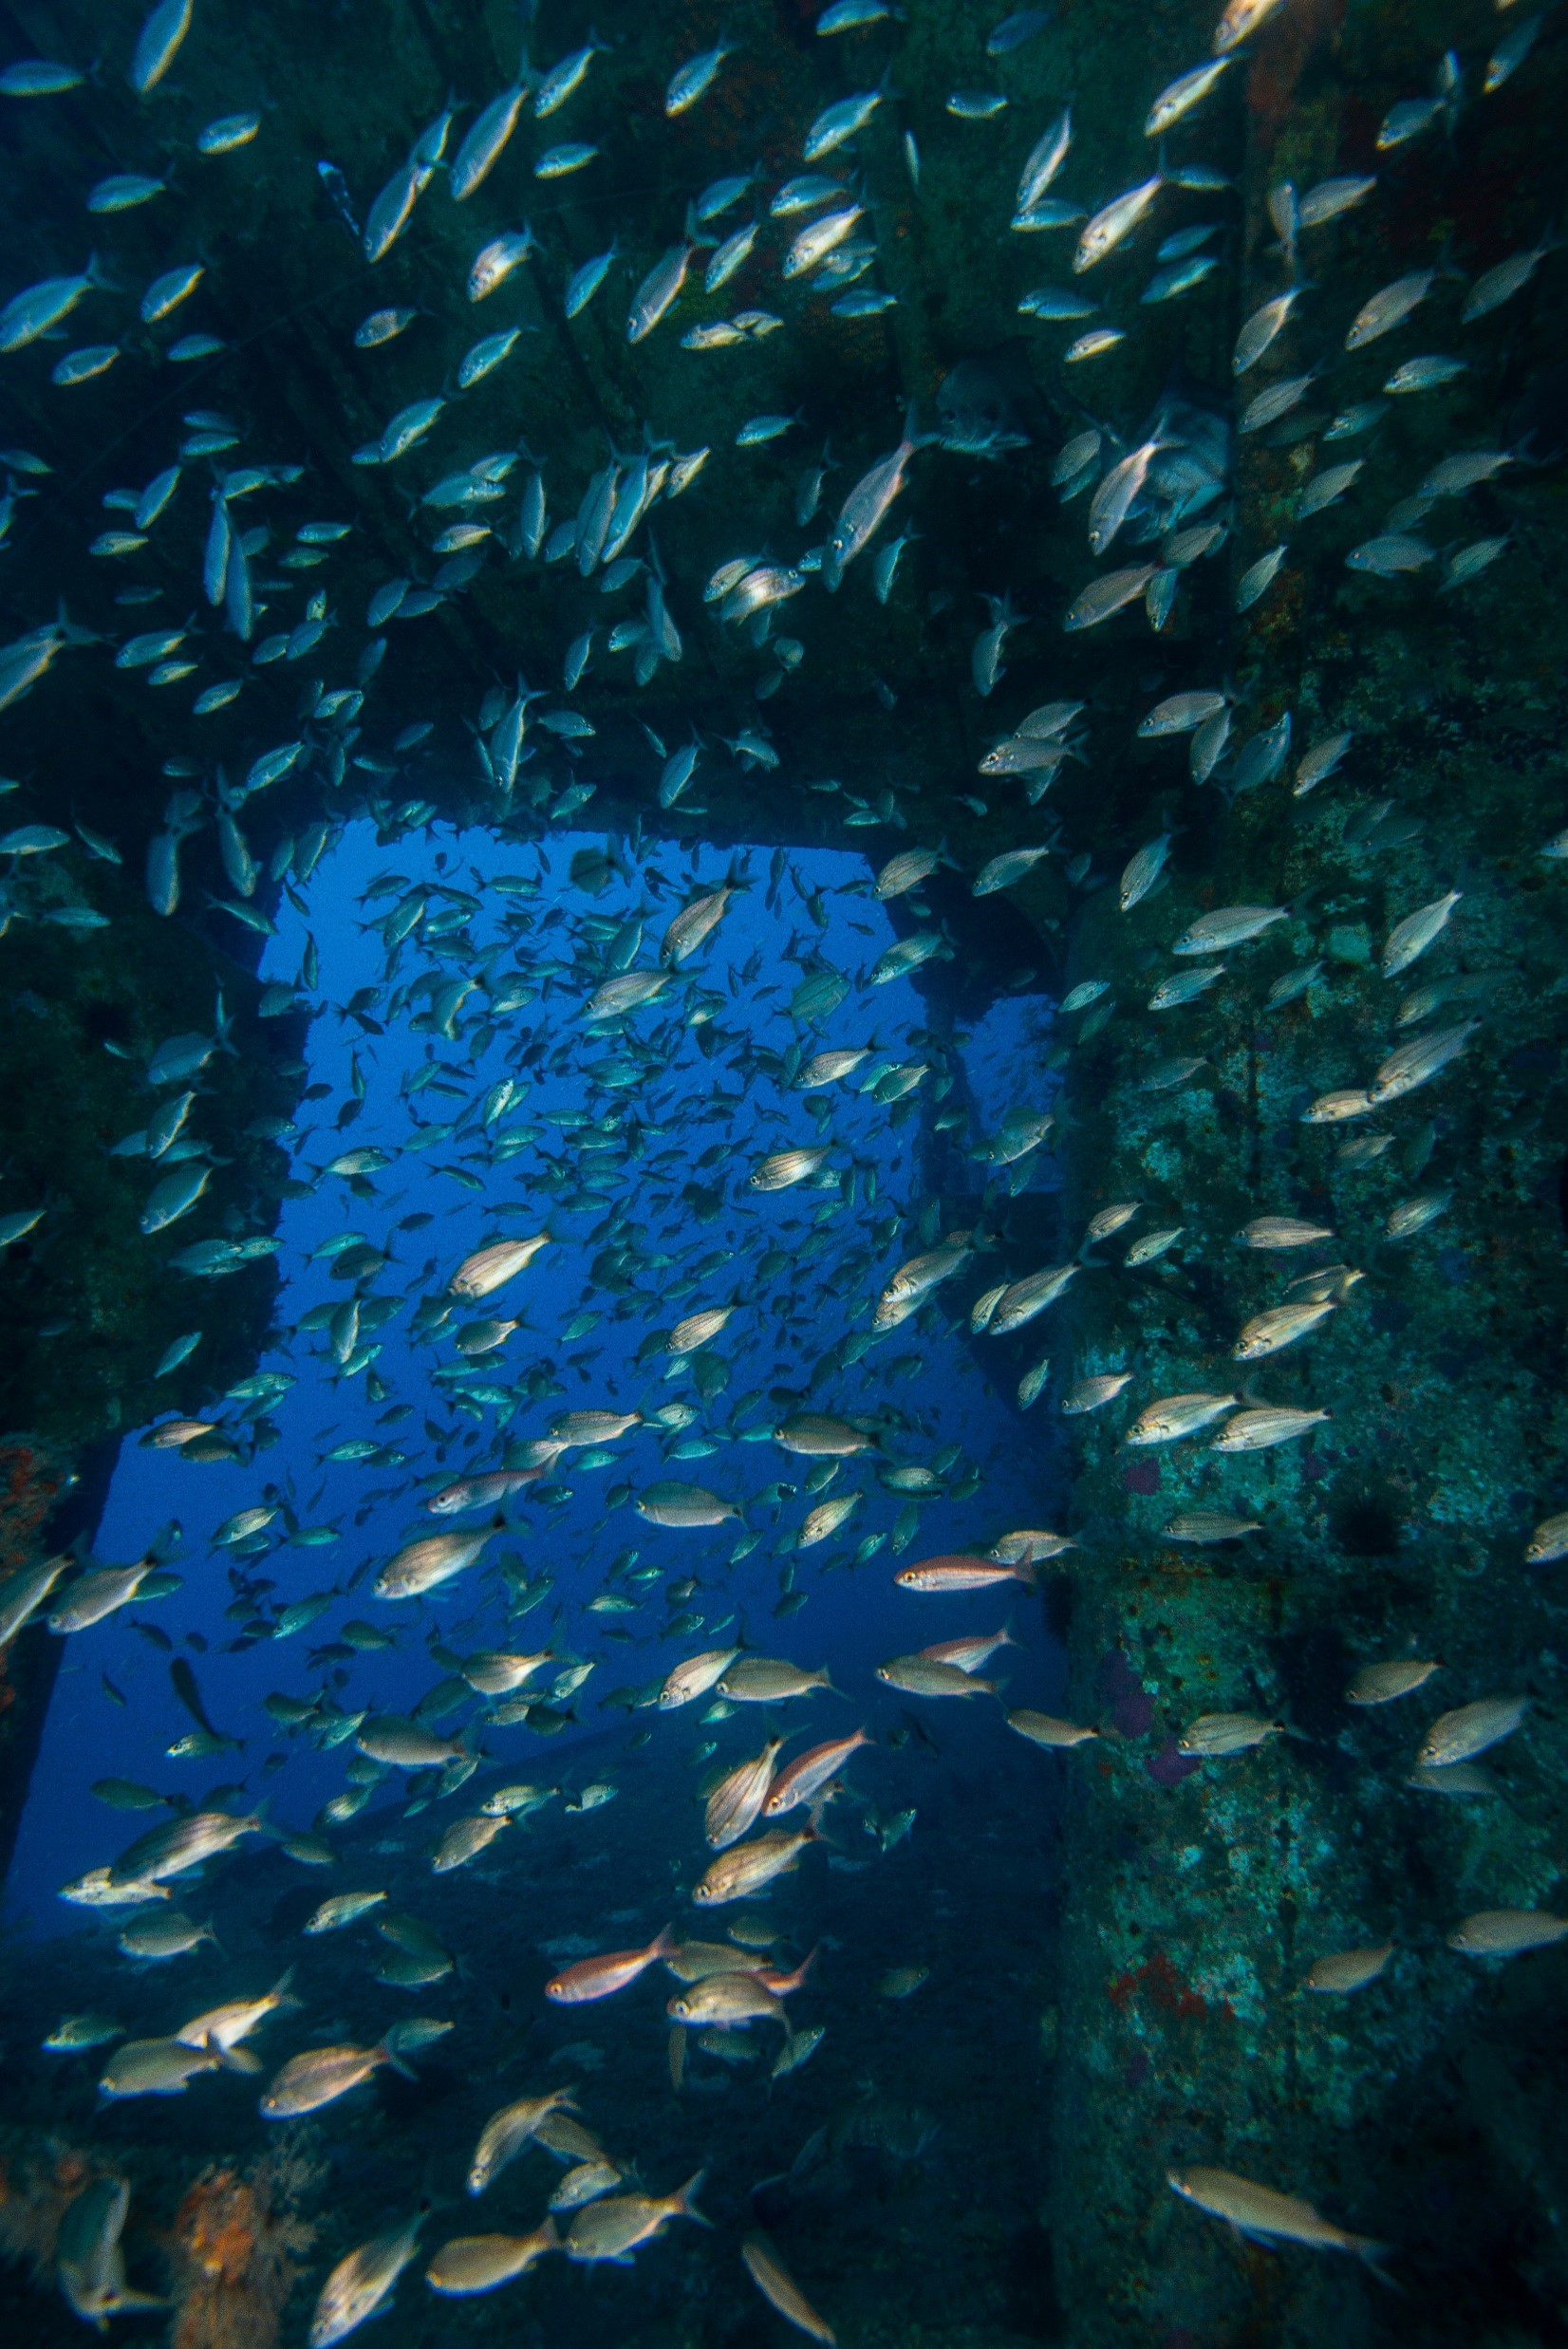 An underwater structure covered in growth forming an artificial reef. The reef is surrounded by fish.